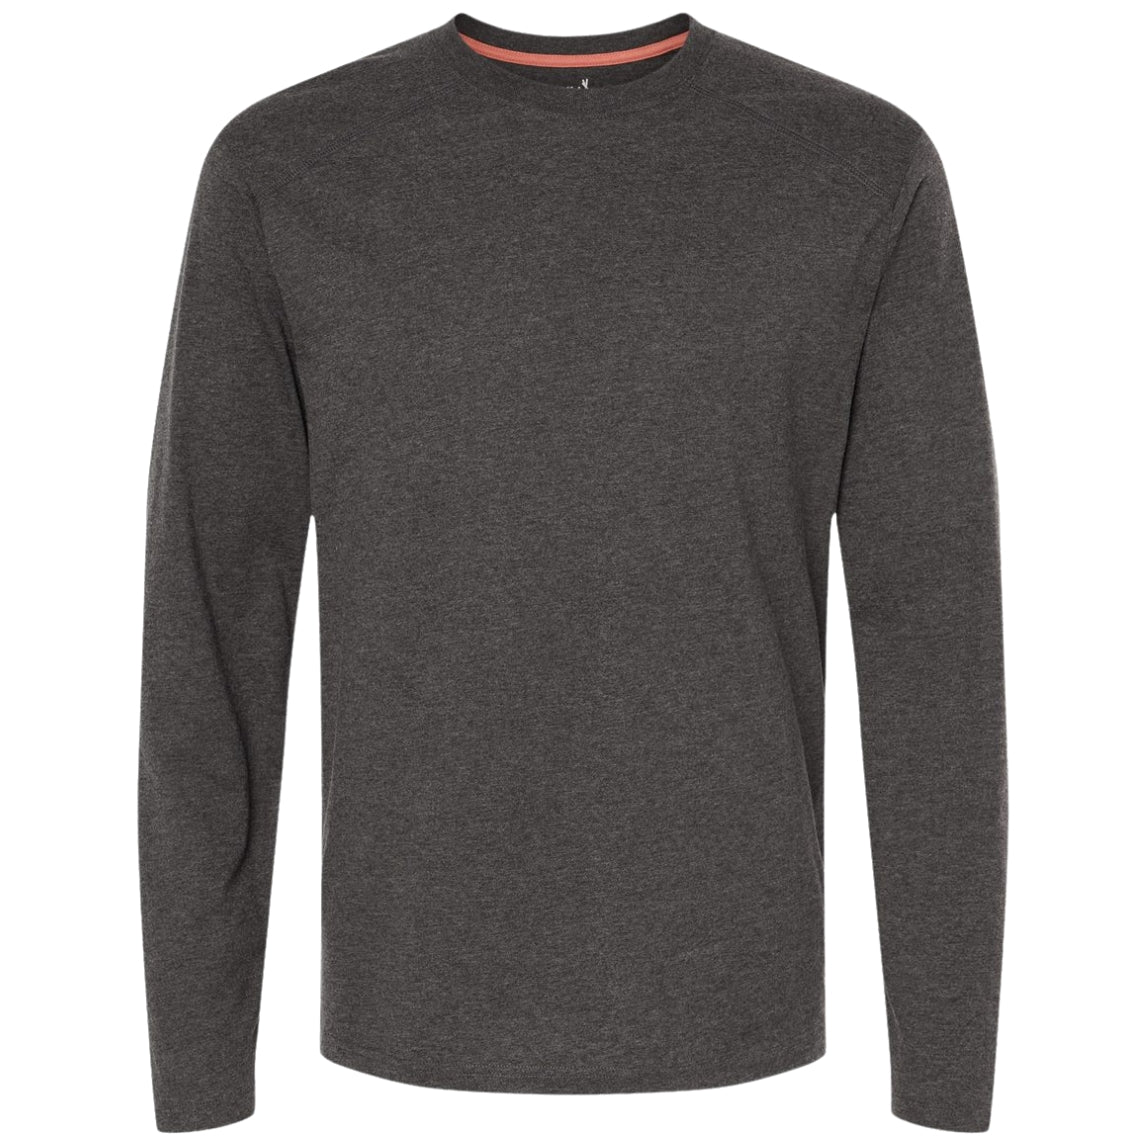 Customizable kastlfel recycledsoft long sleeve shirt in carbon.